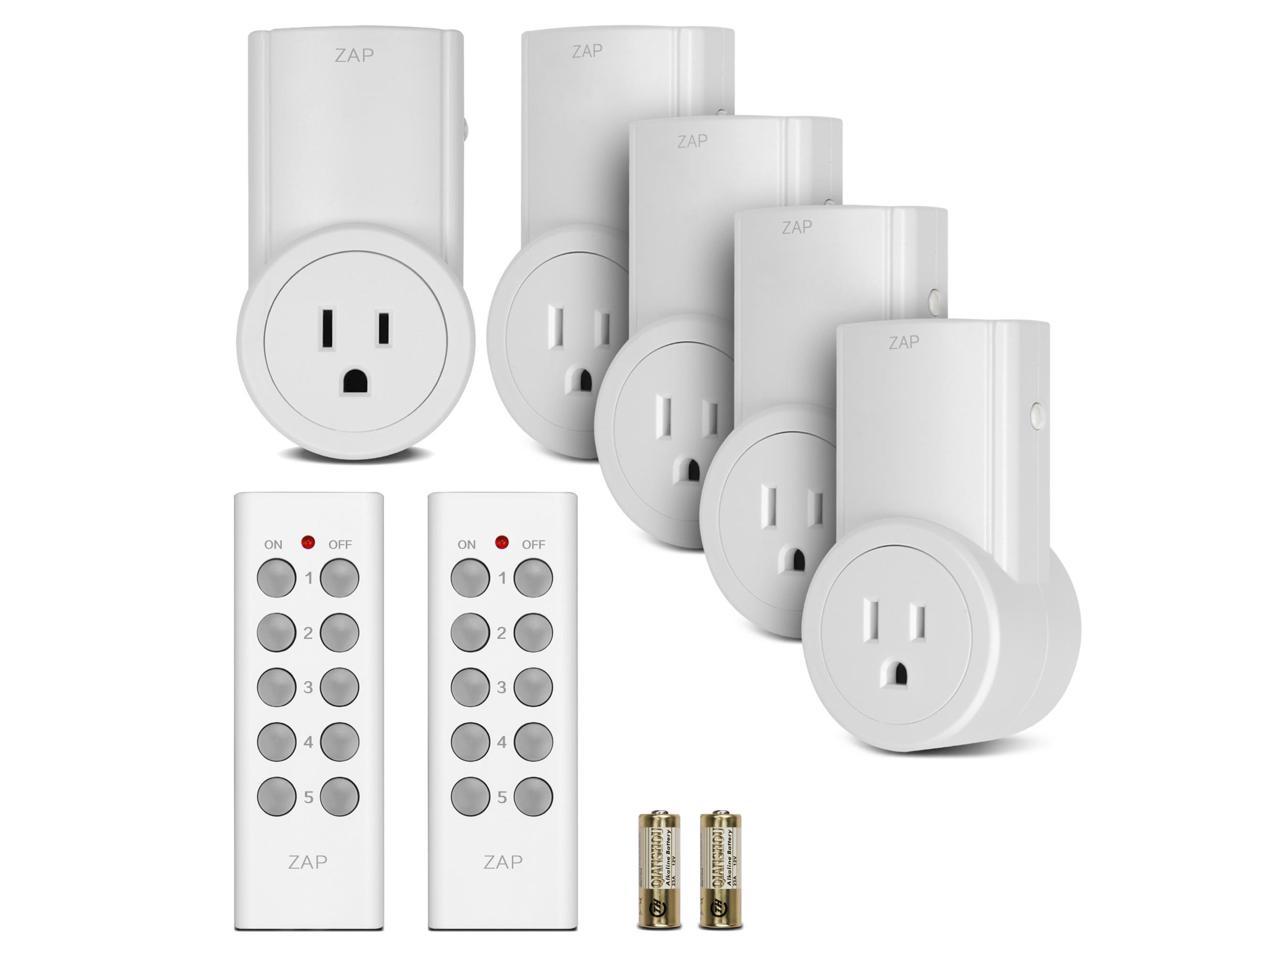 Etekcity 1,3,5 Pack Wireless Remote Control Electrical Light Outlet Switch 